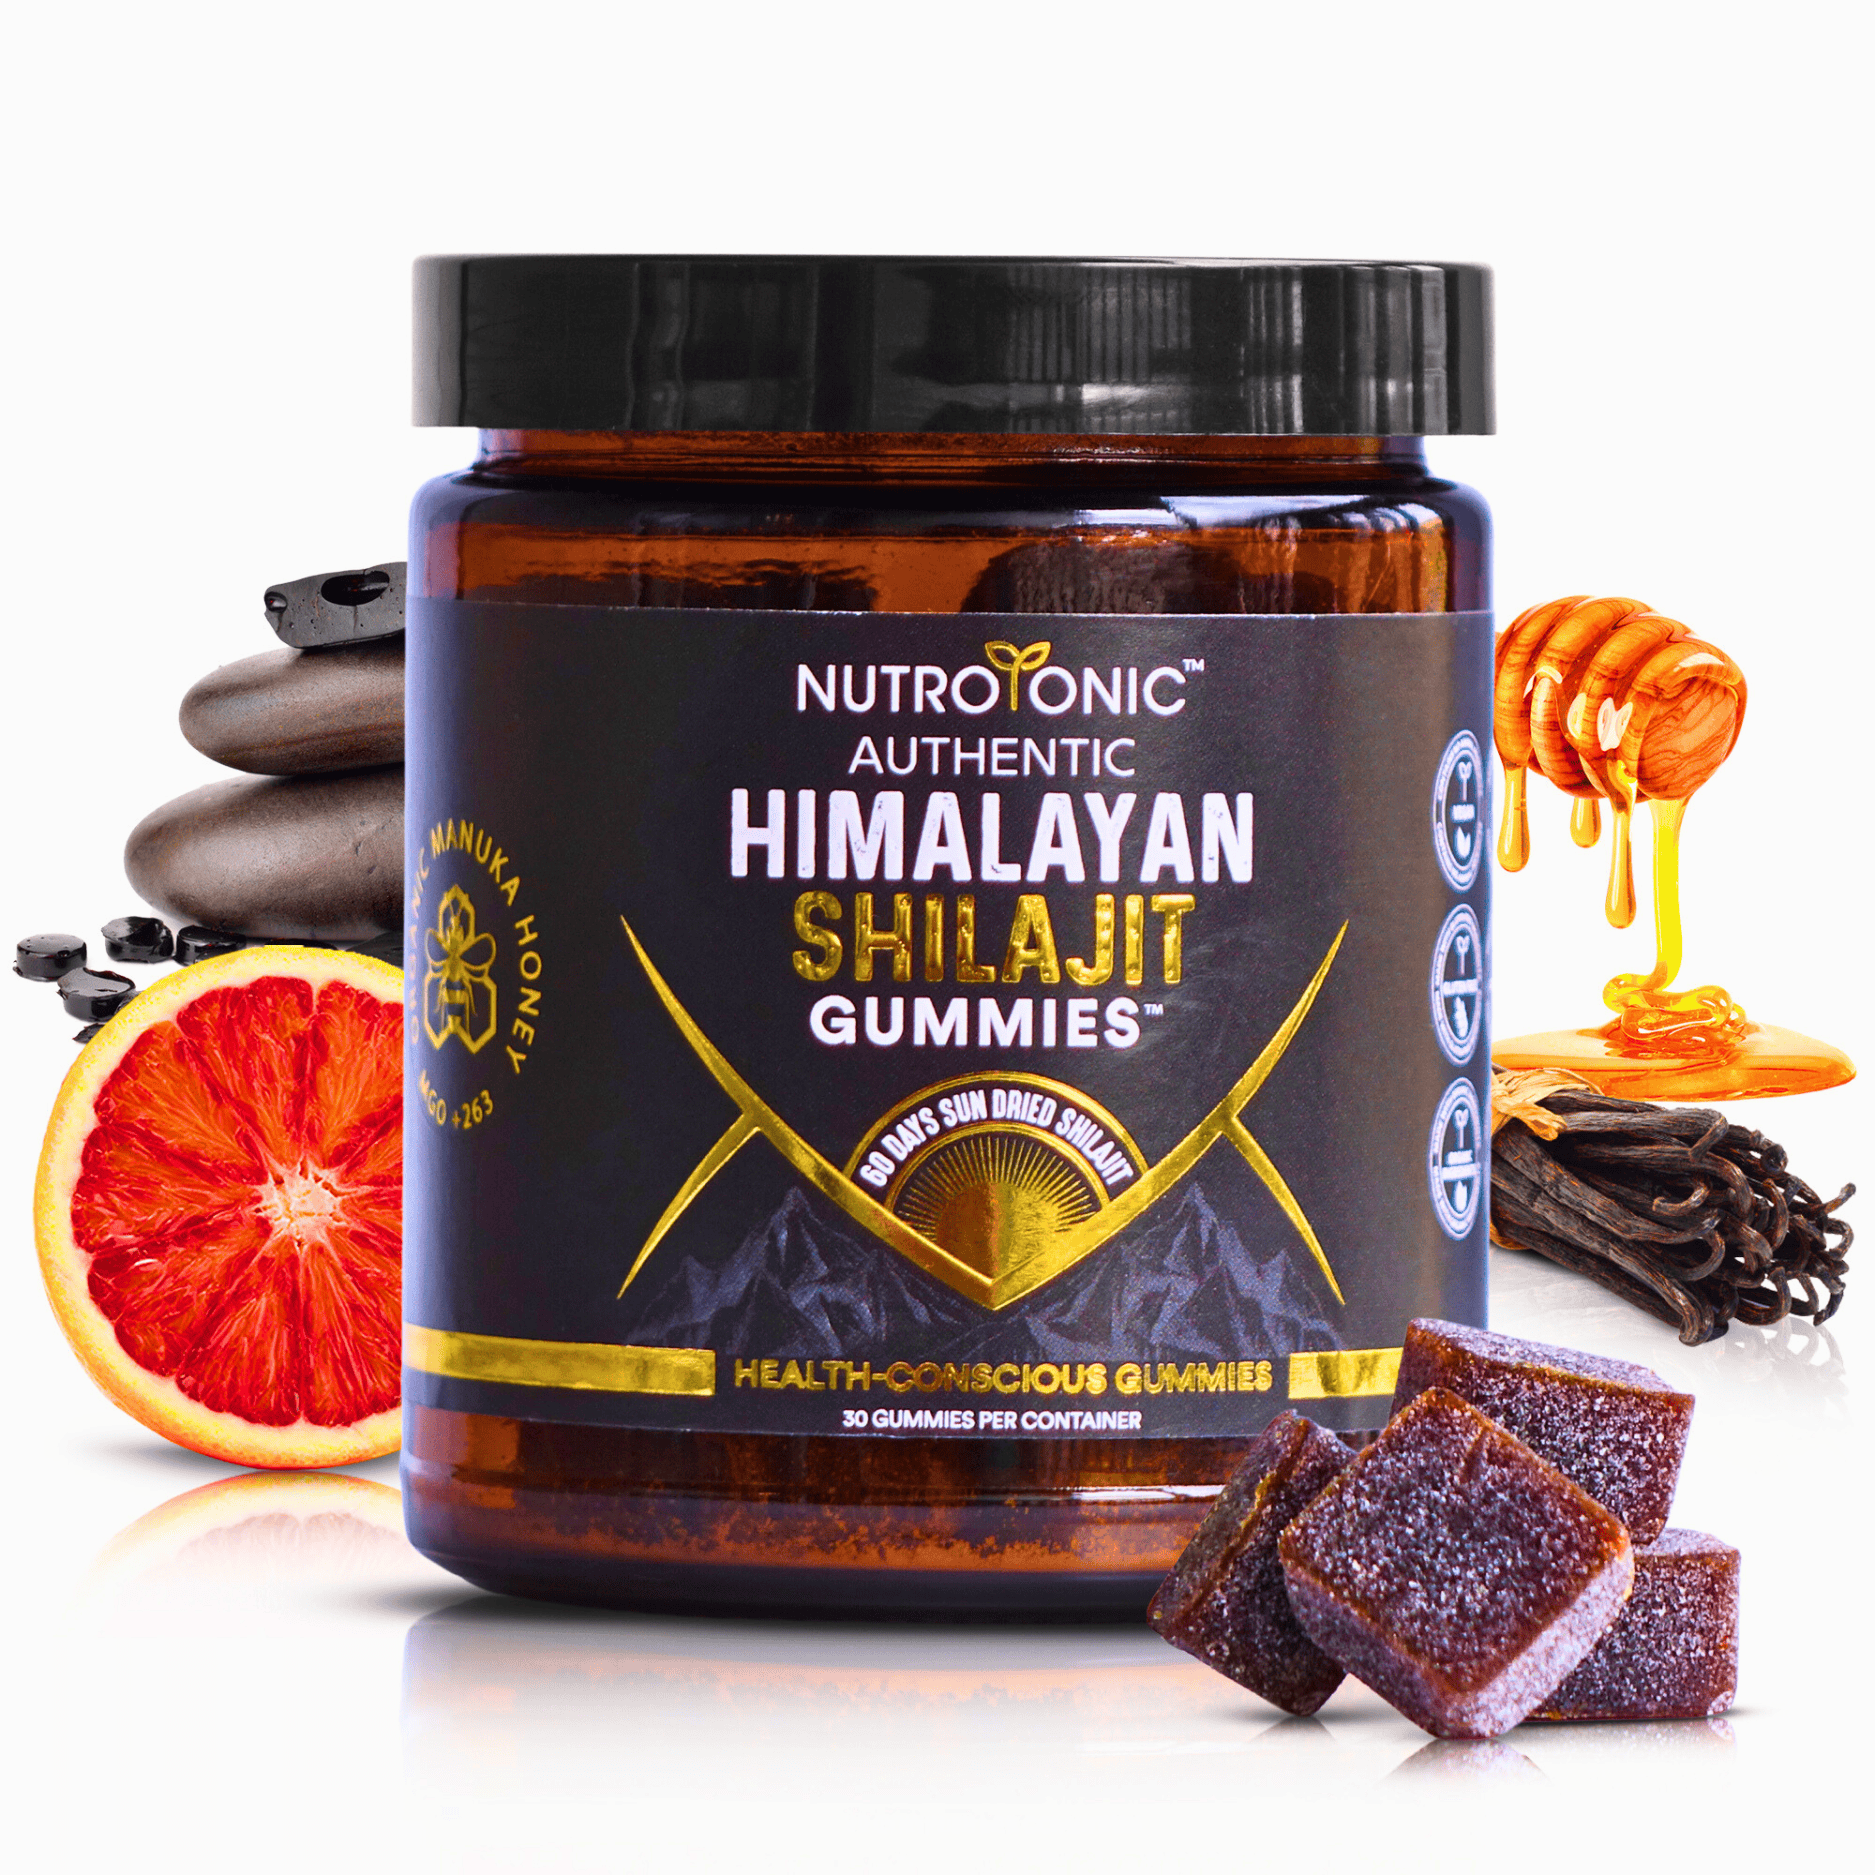 Authentic Himalayan Shilajit, A Natural Remedy with Multiple Health Benefits